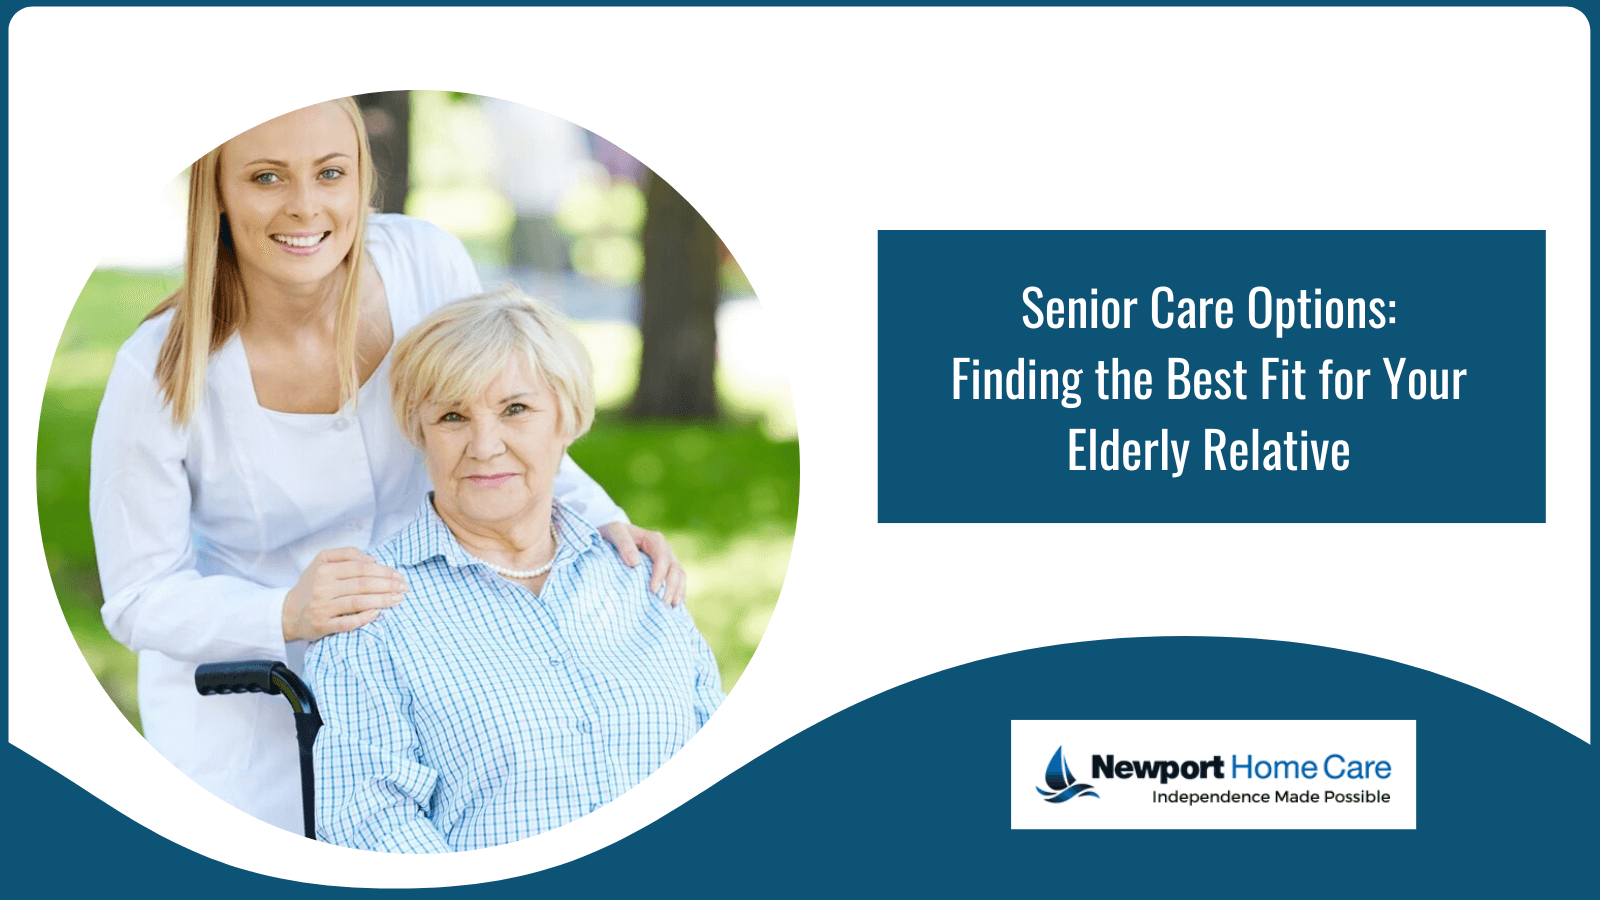 Senior Care Options: Finding the Best Fit for Your Elderly Relative